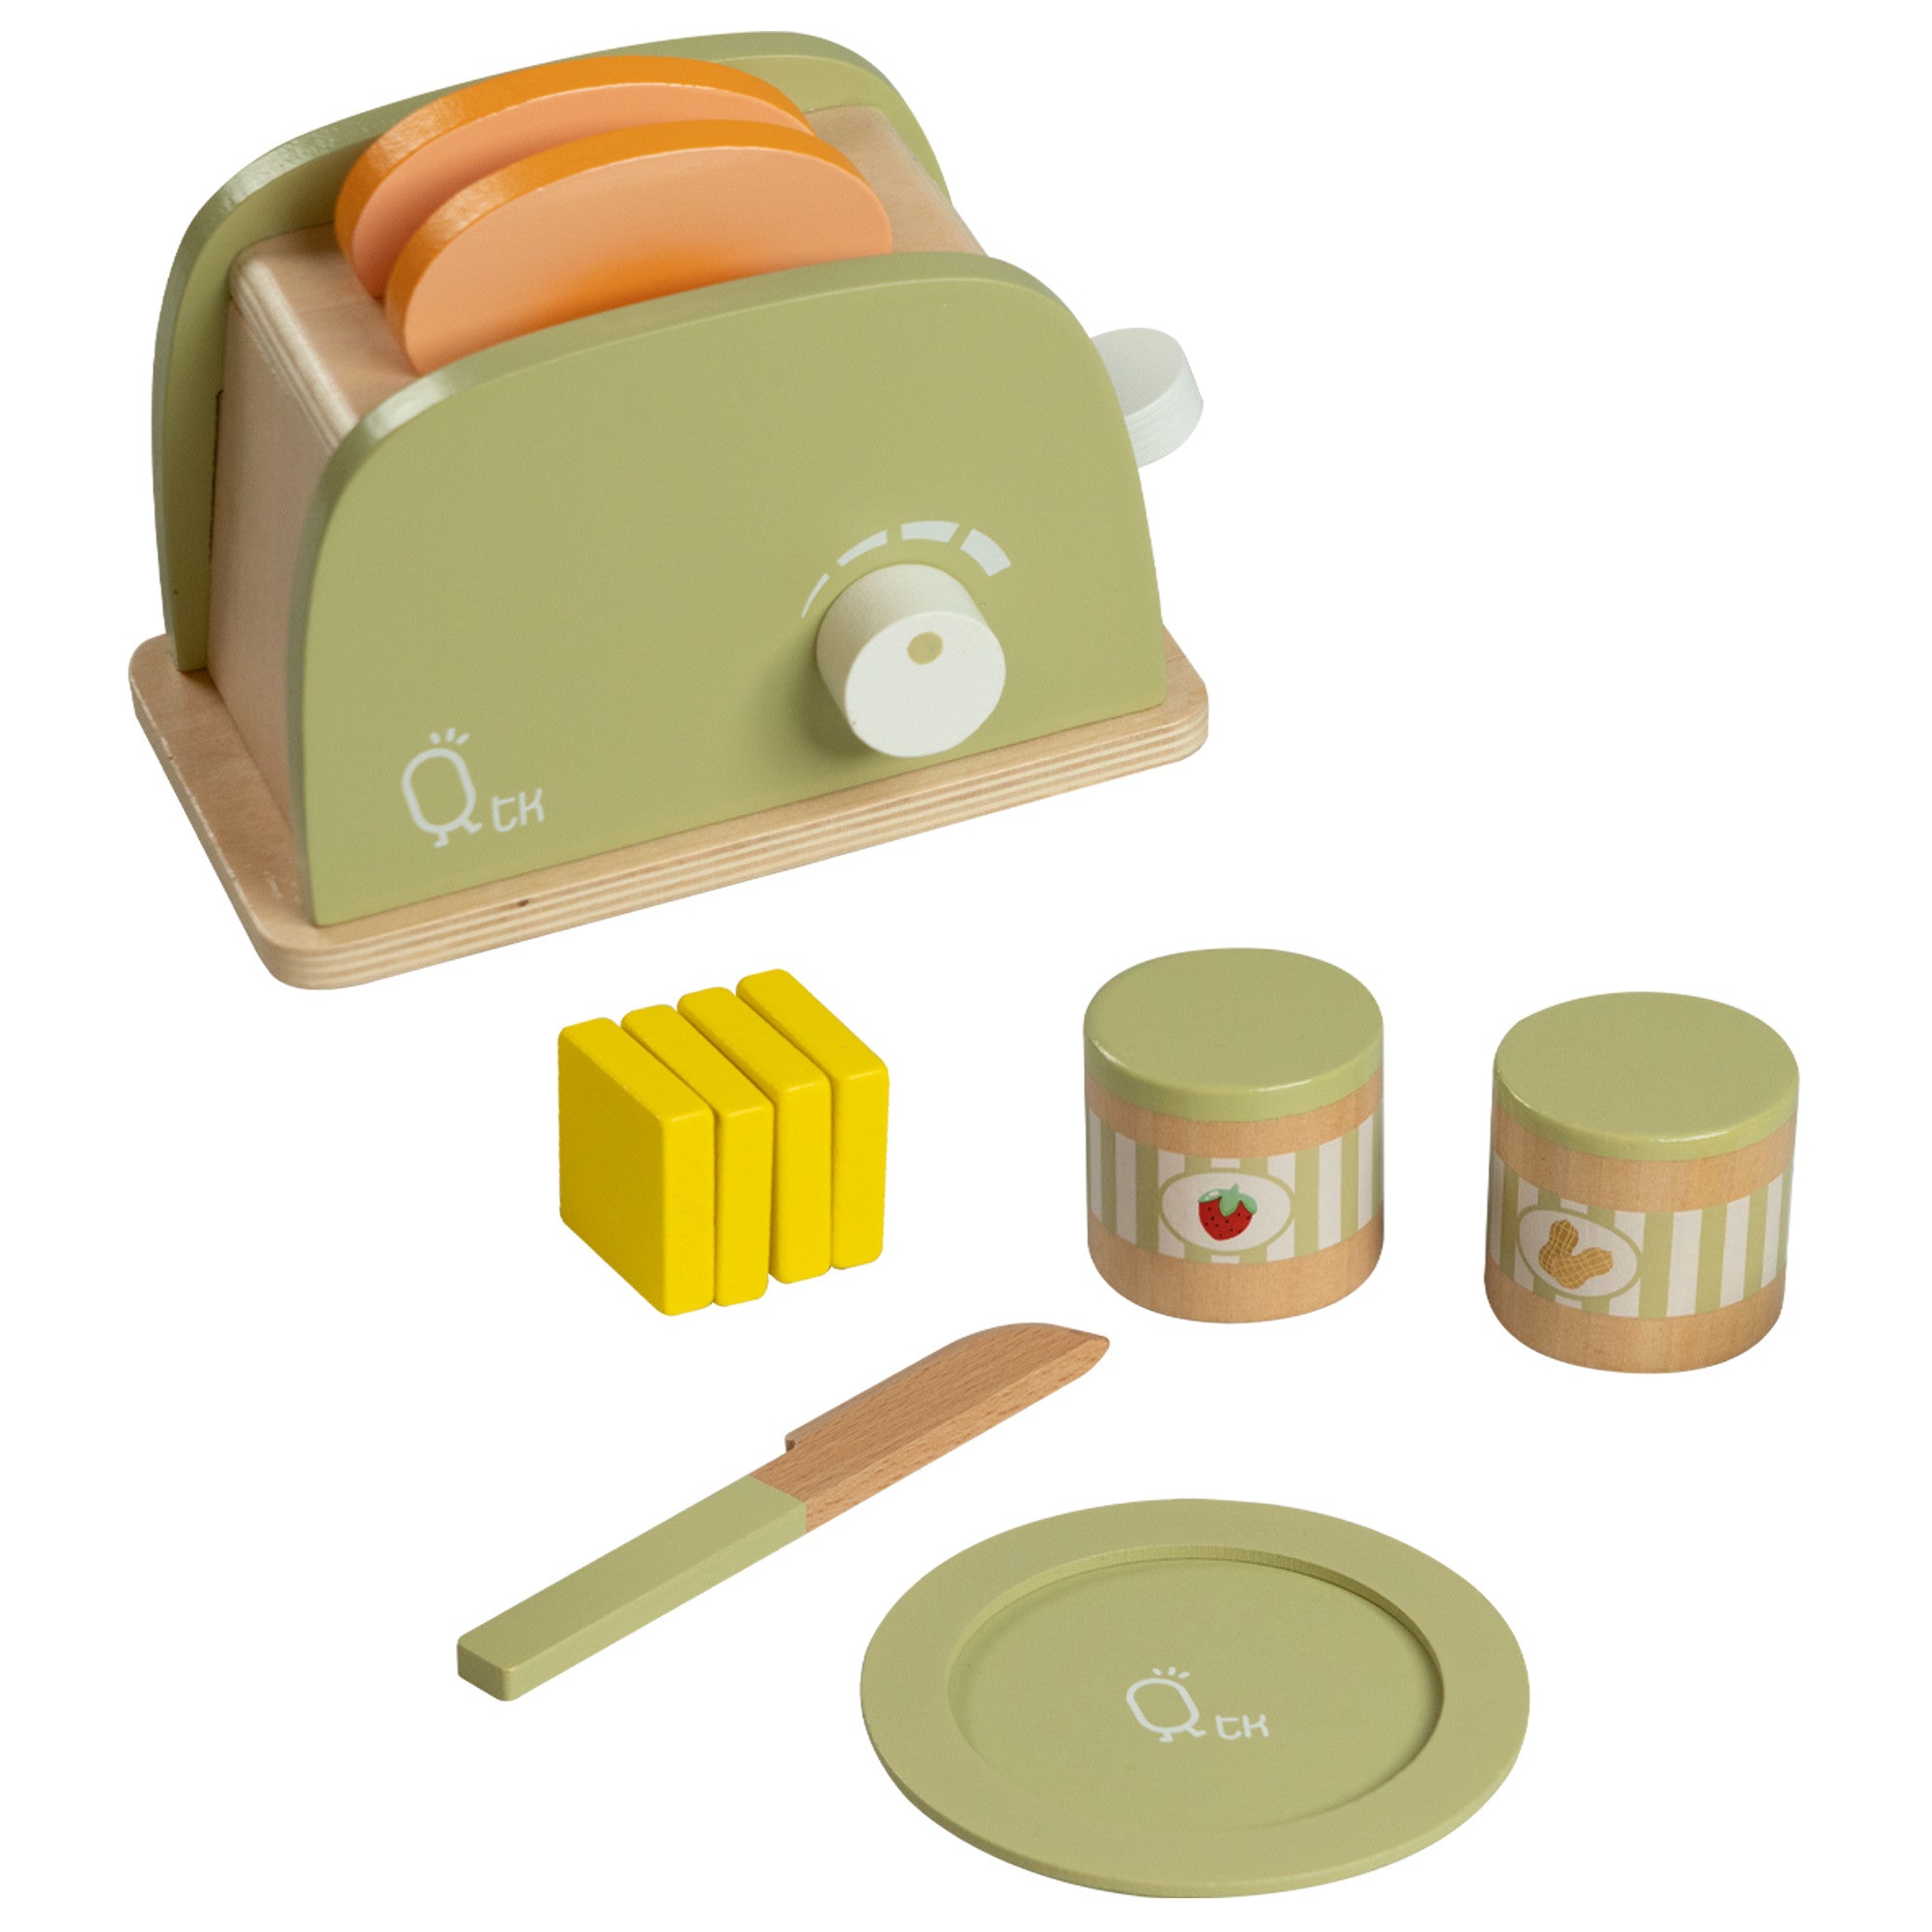 Toaster accessories, Product accessories